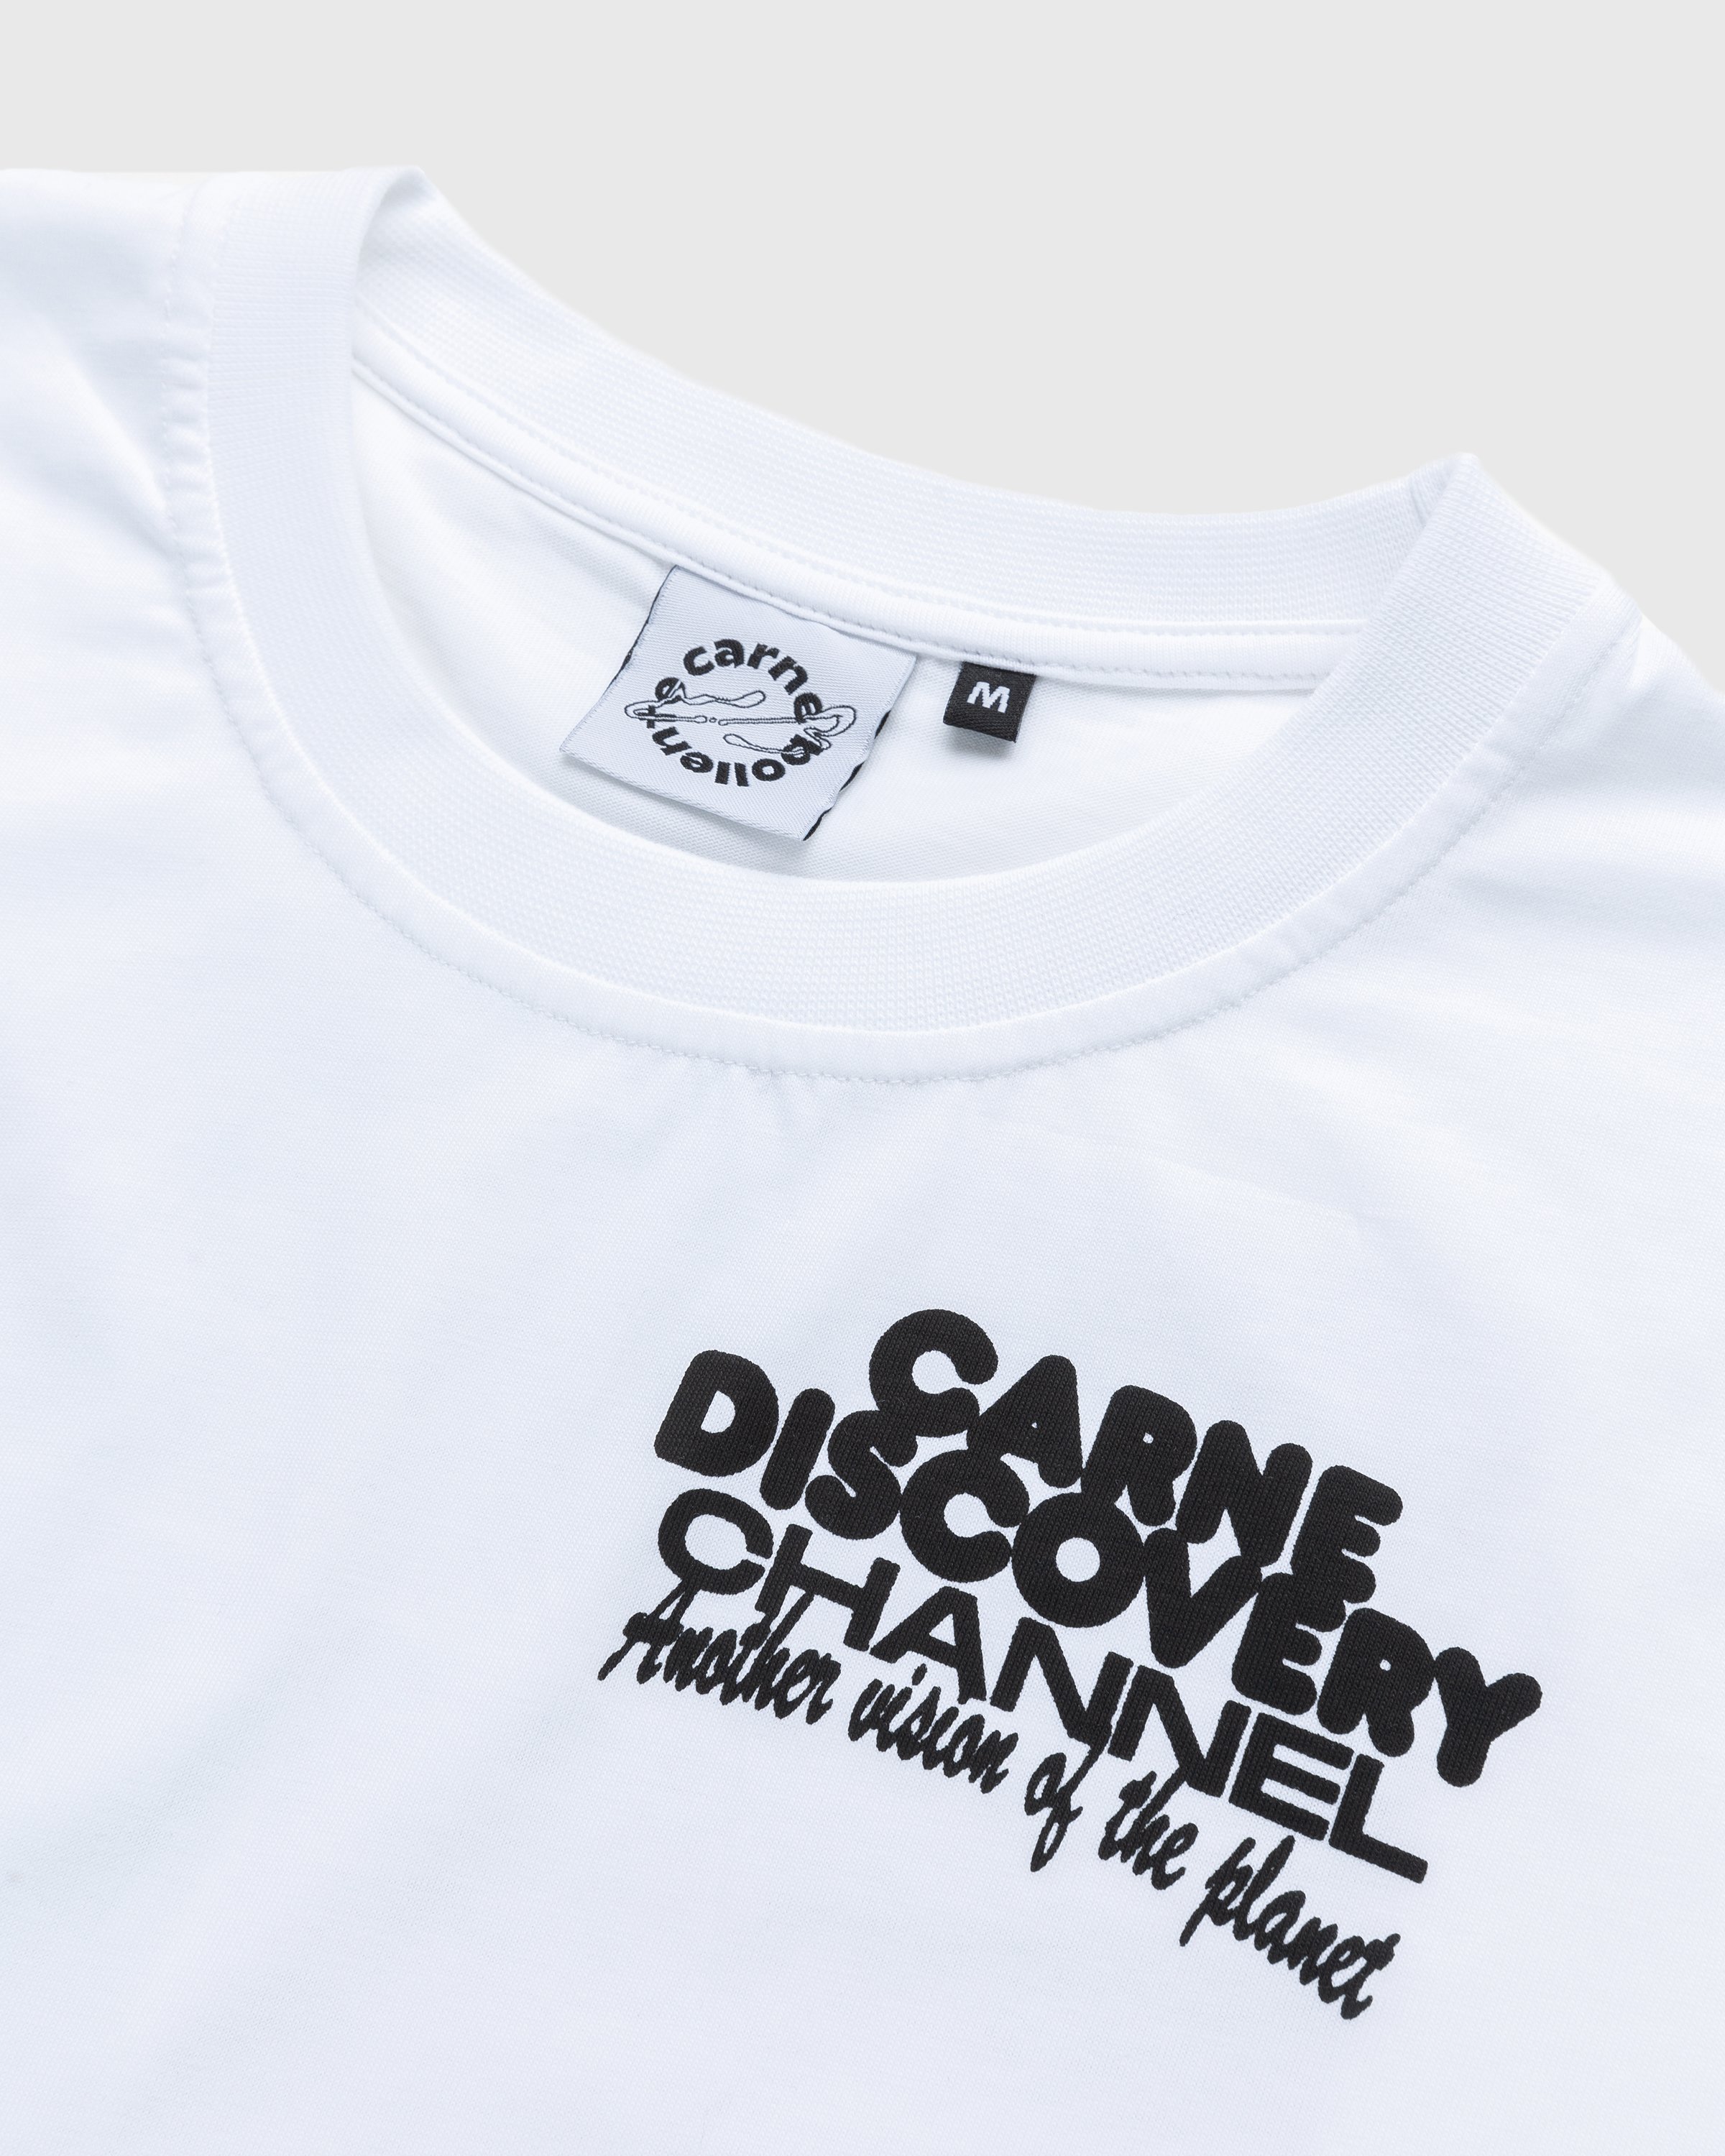 Carne Bollente - Carne Discovery Channel T-Shirt White - Clothing - White - Image 3